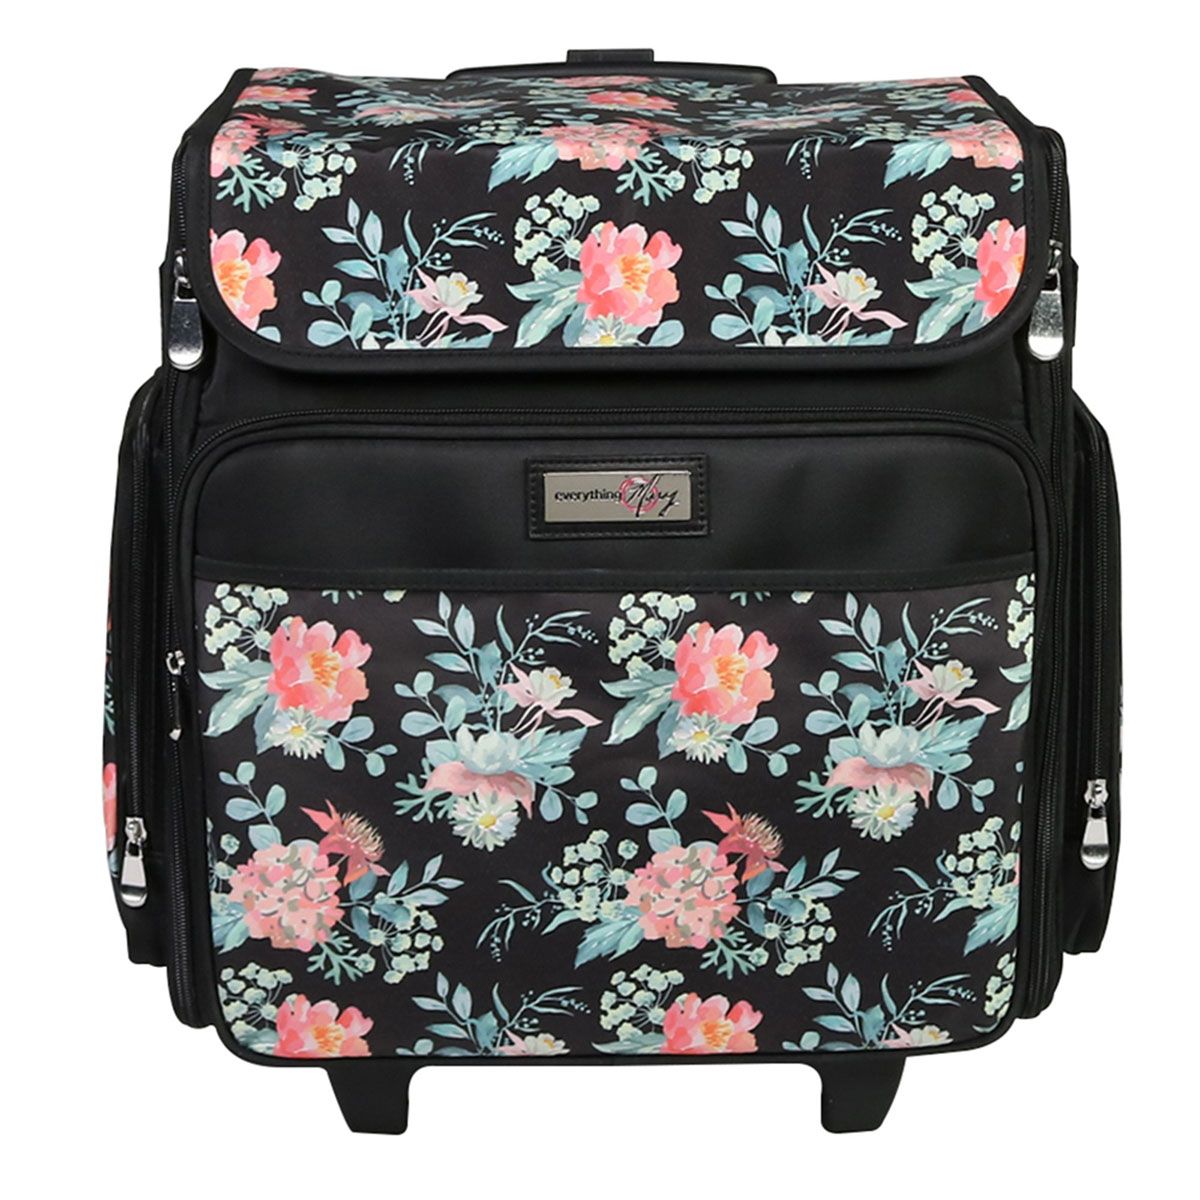 Everything Mary 12777-2 Black & Floral Rolling Tote Bag, 2 Wheeled